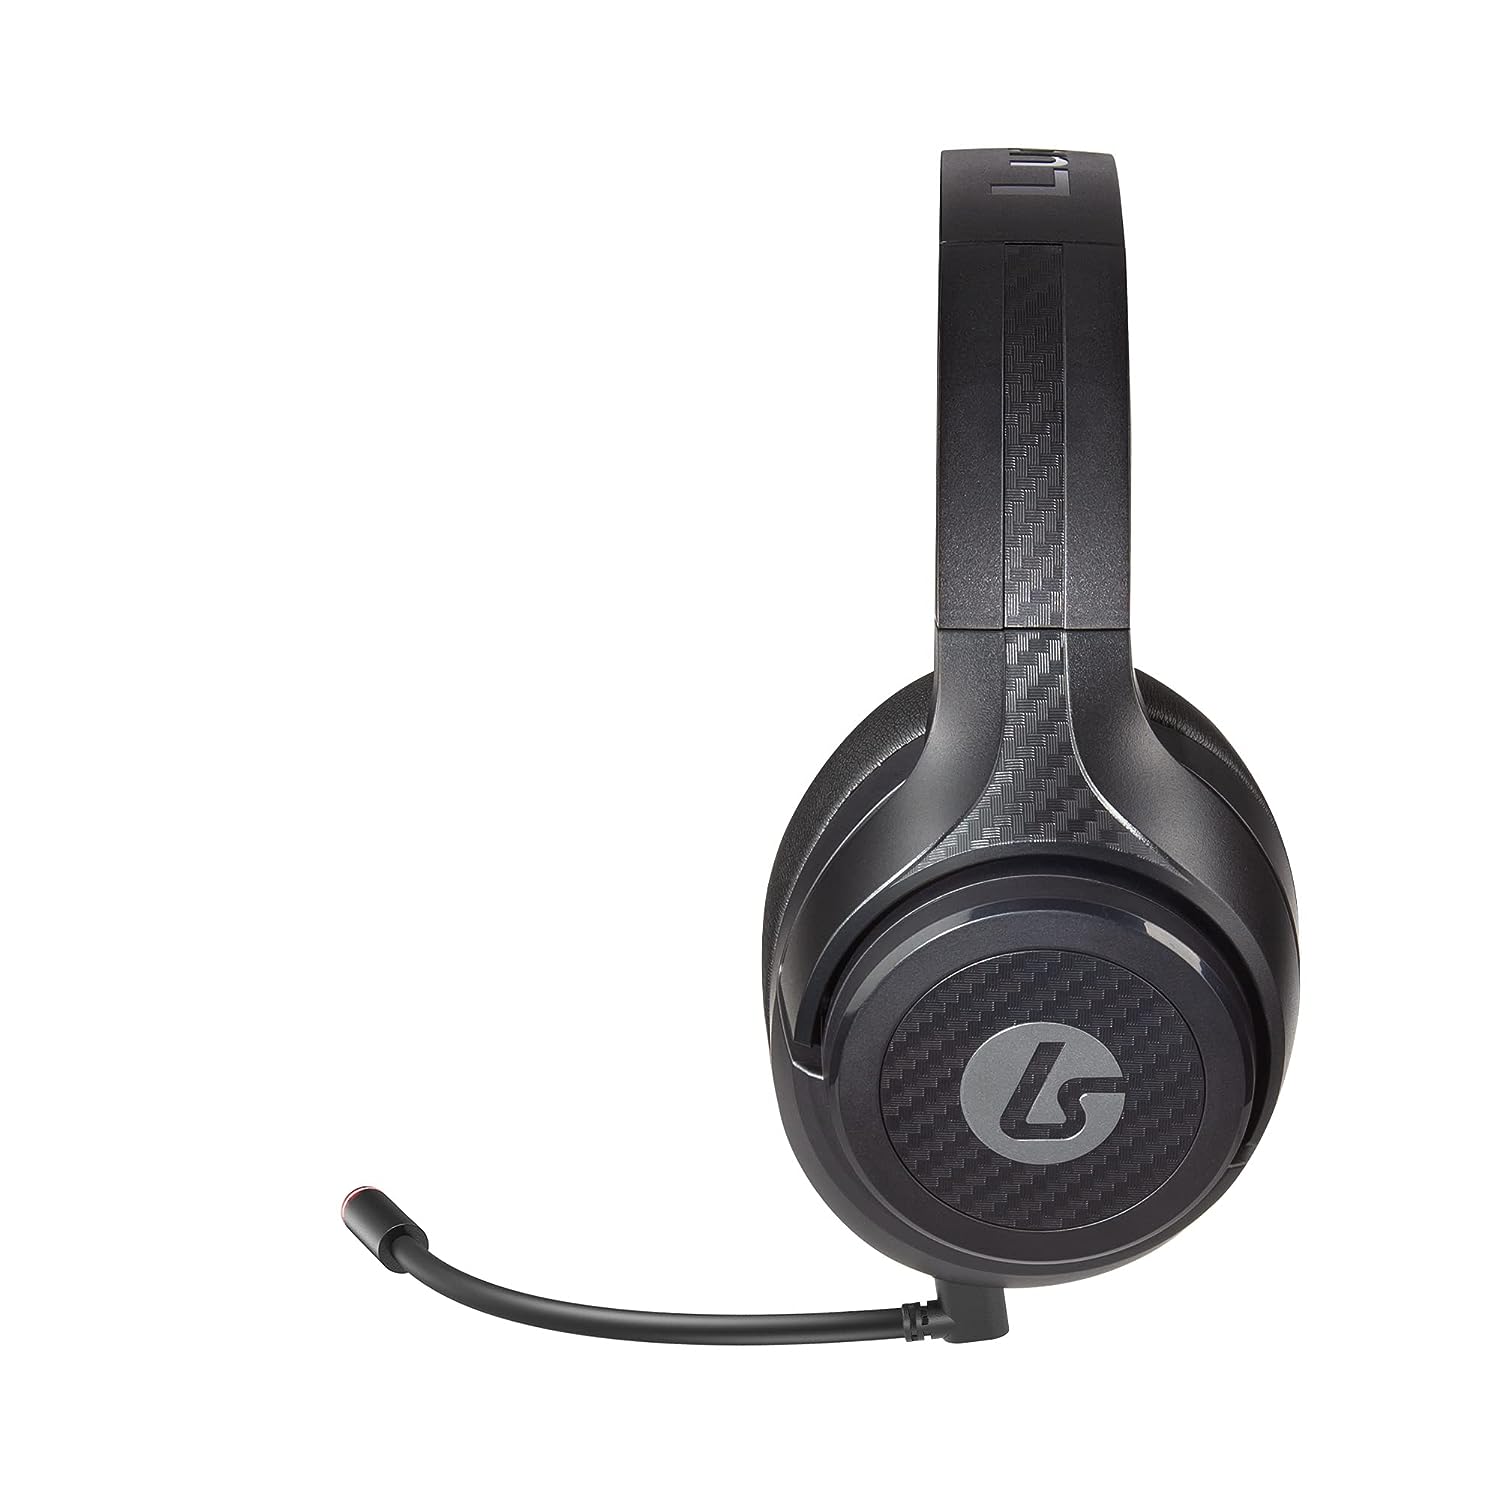 PowerA LucidSound LS15X Wireless Gaming Headset for Xbox One/Series X|S - Black (New)